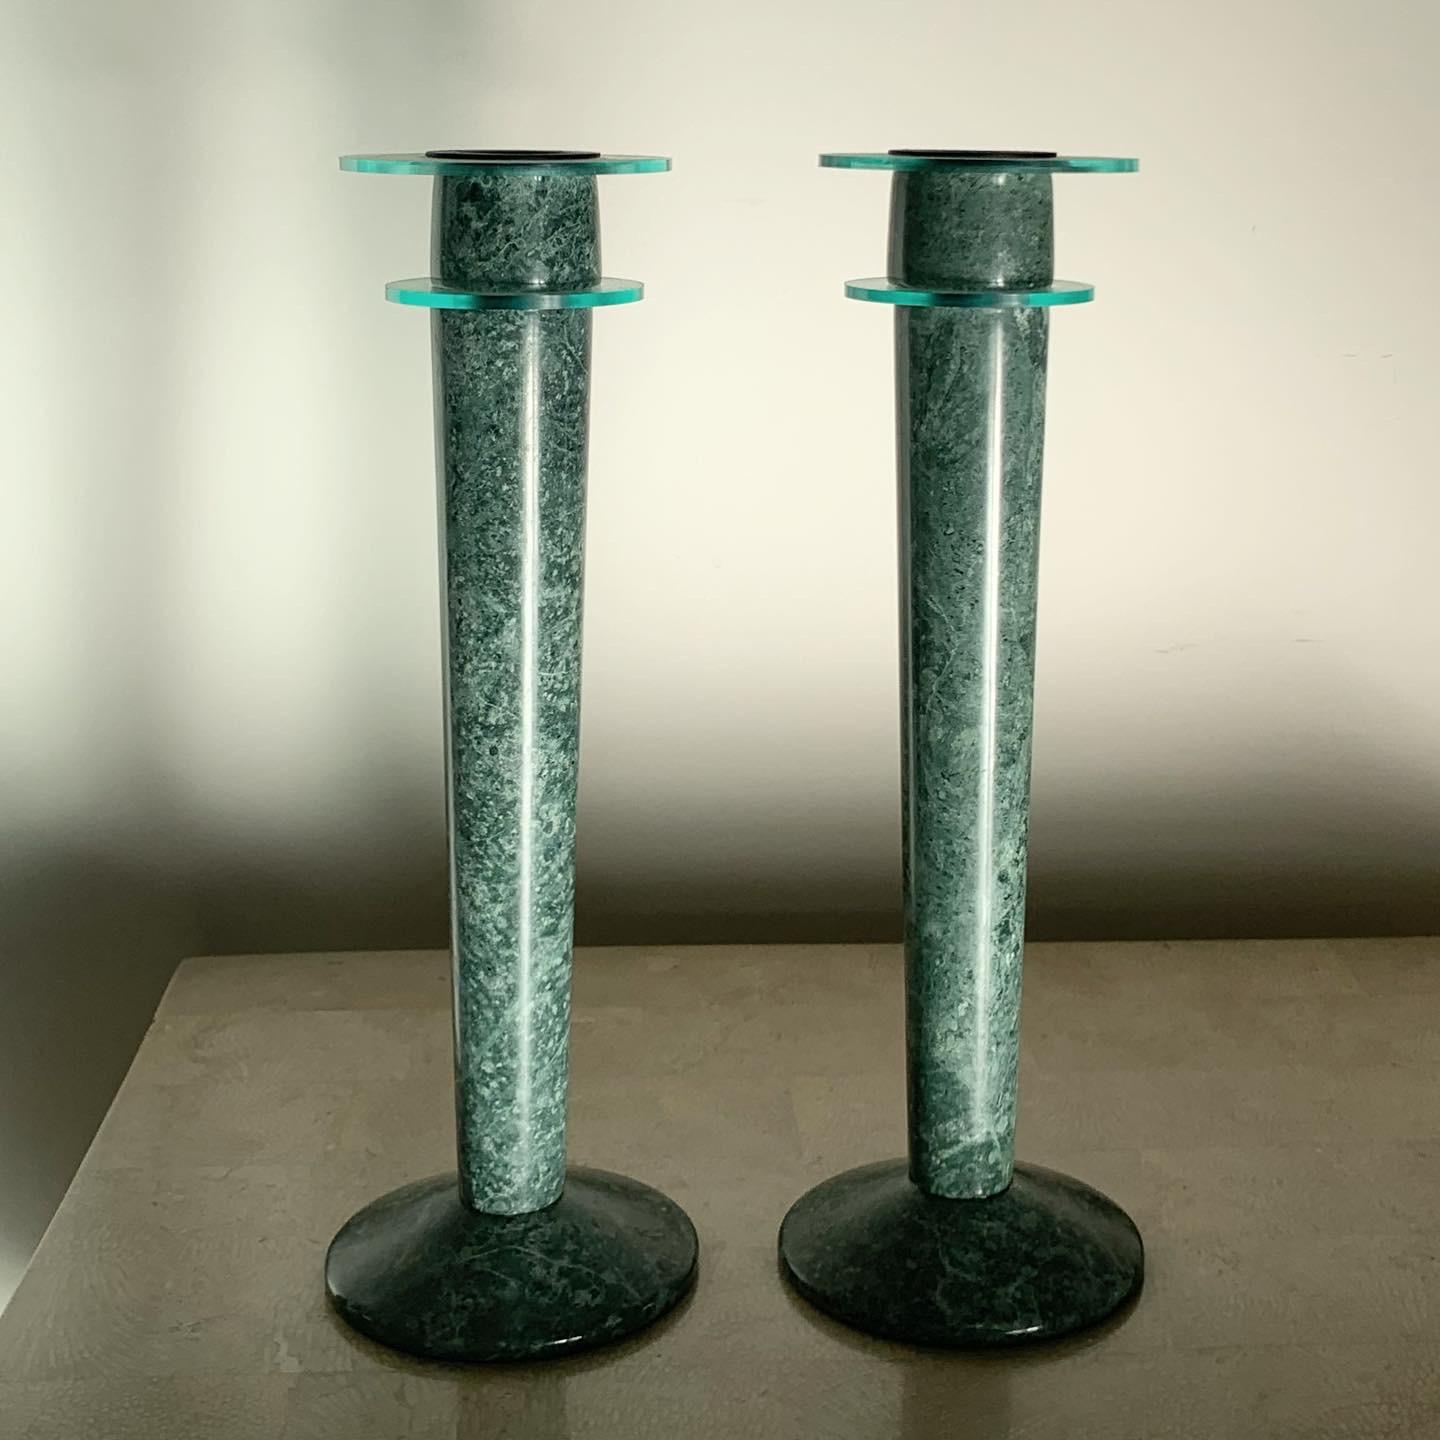 European Postmodern Green Marble and Lucite Candlesticks, circa 1980s For Sale